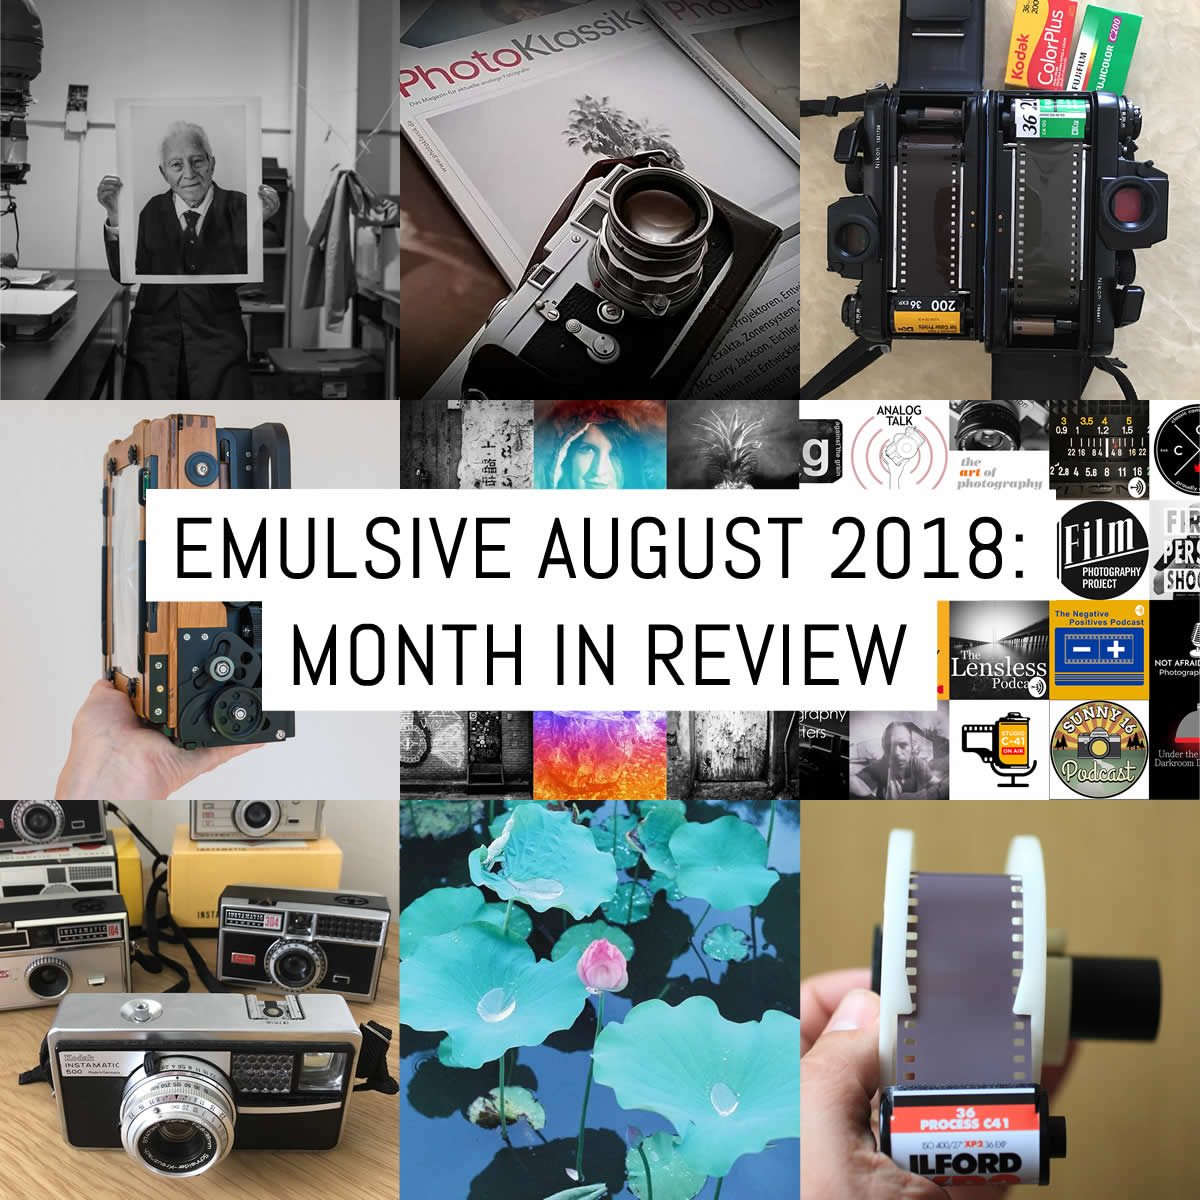 Cover - Month in review - 2018 August